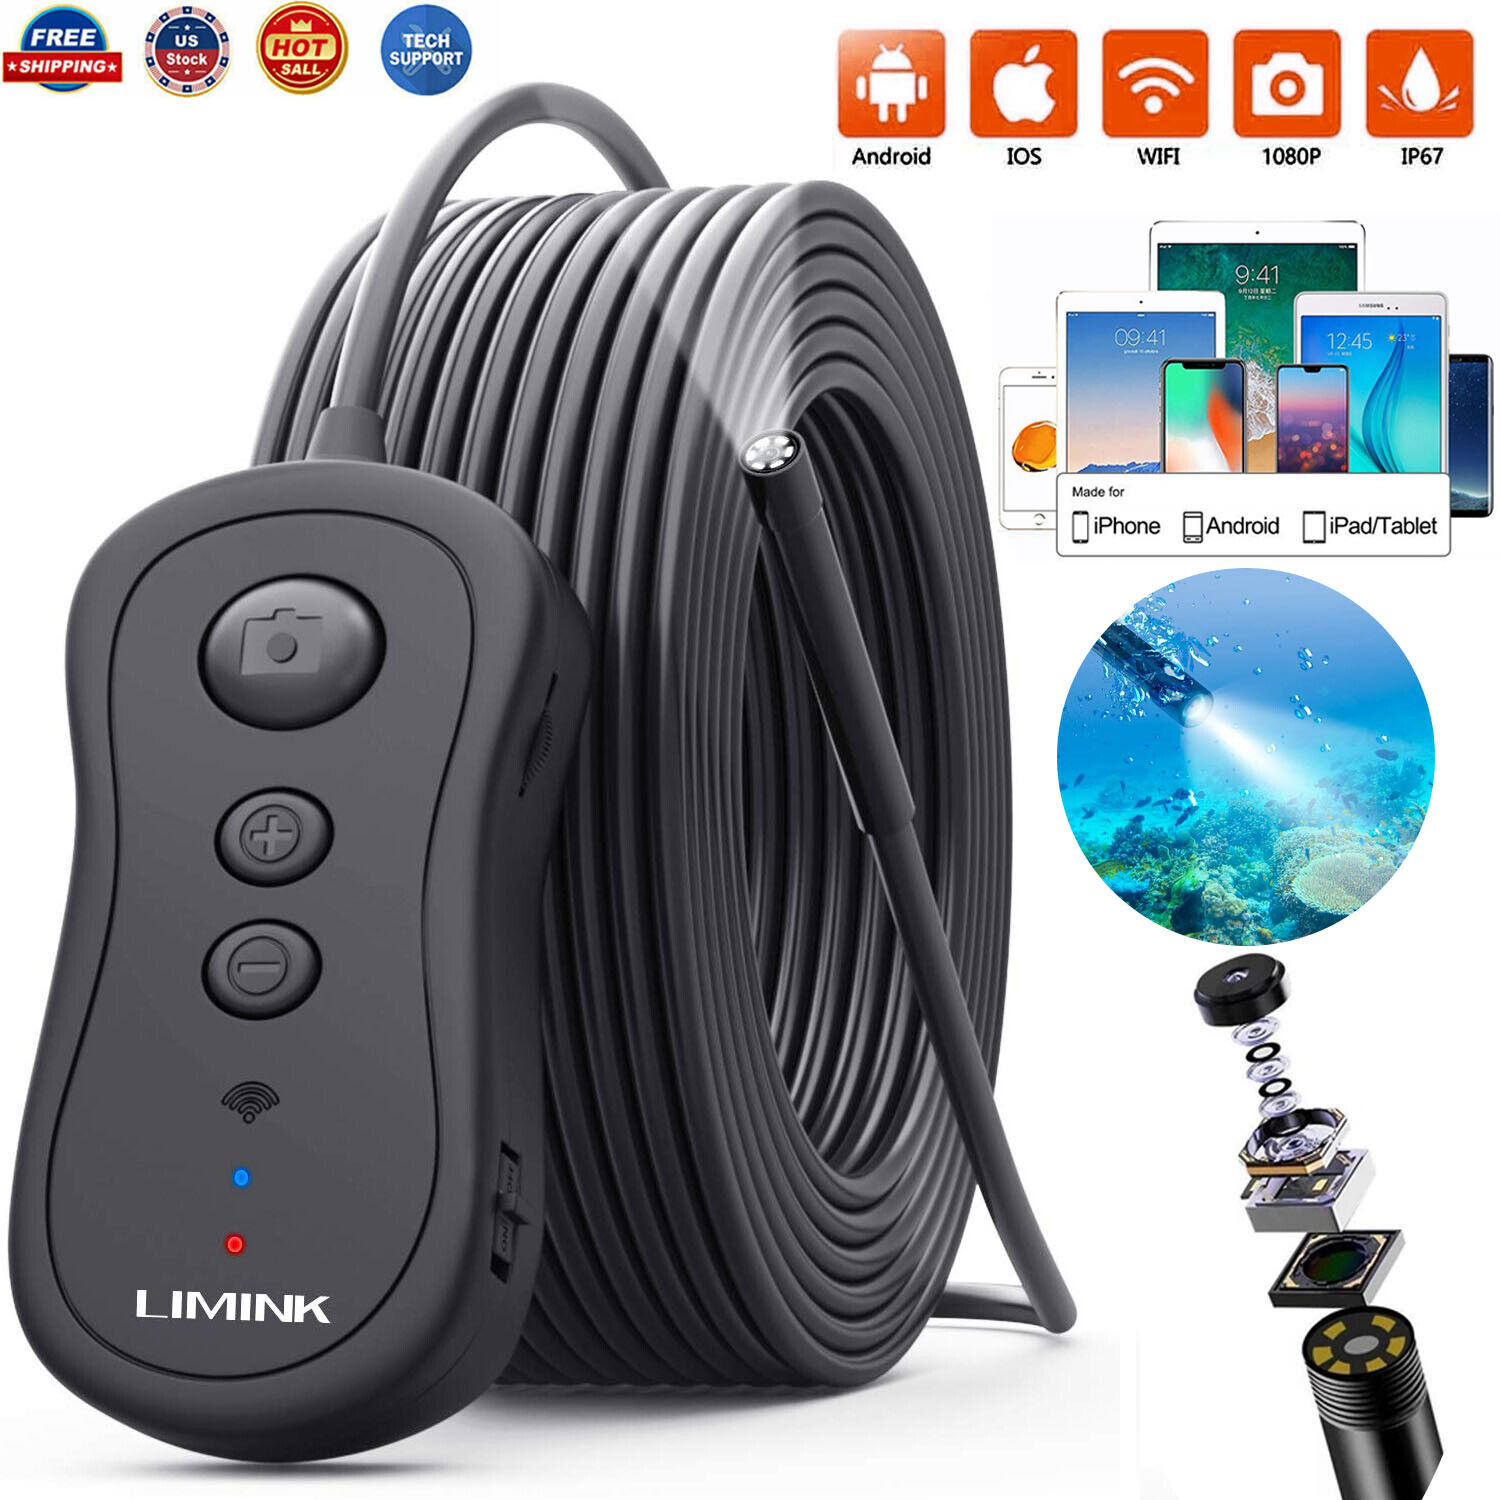 Bombing free shipping Wireless Endoscope WiFi Our shop most popular Borescope Snake Sewer 32.8Ft 2MP Camera